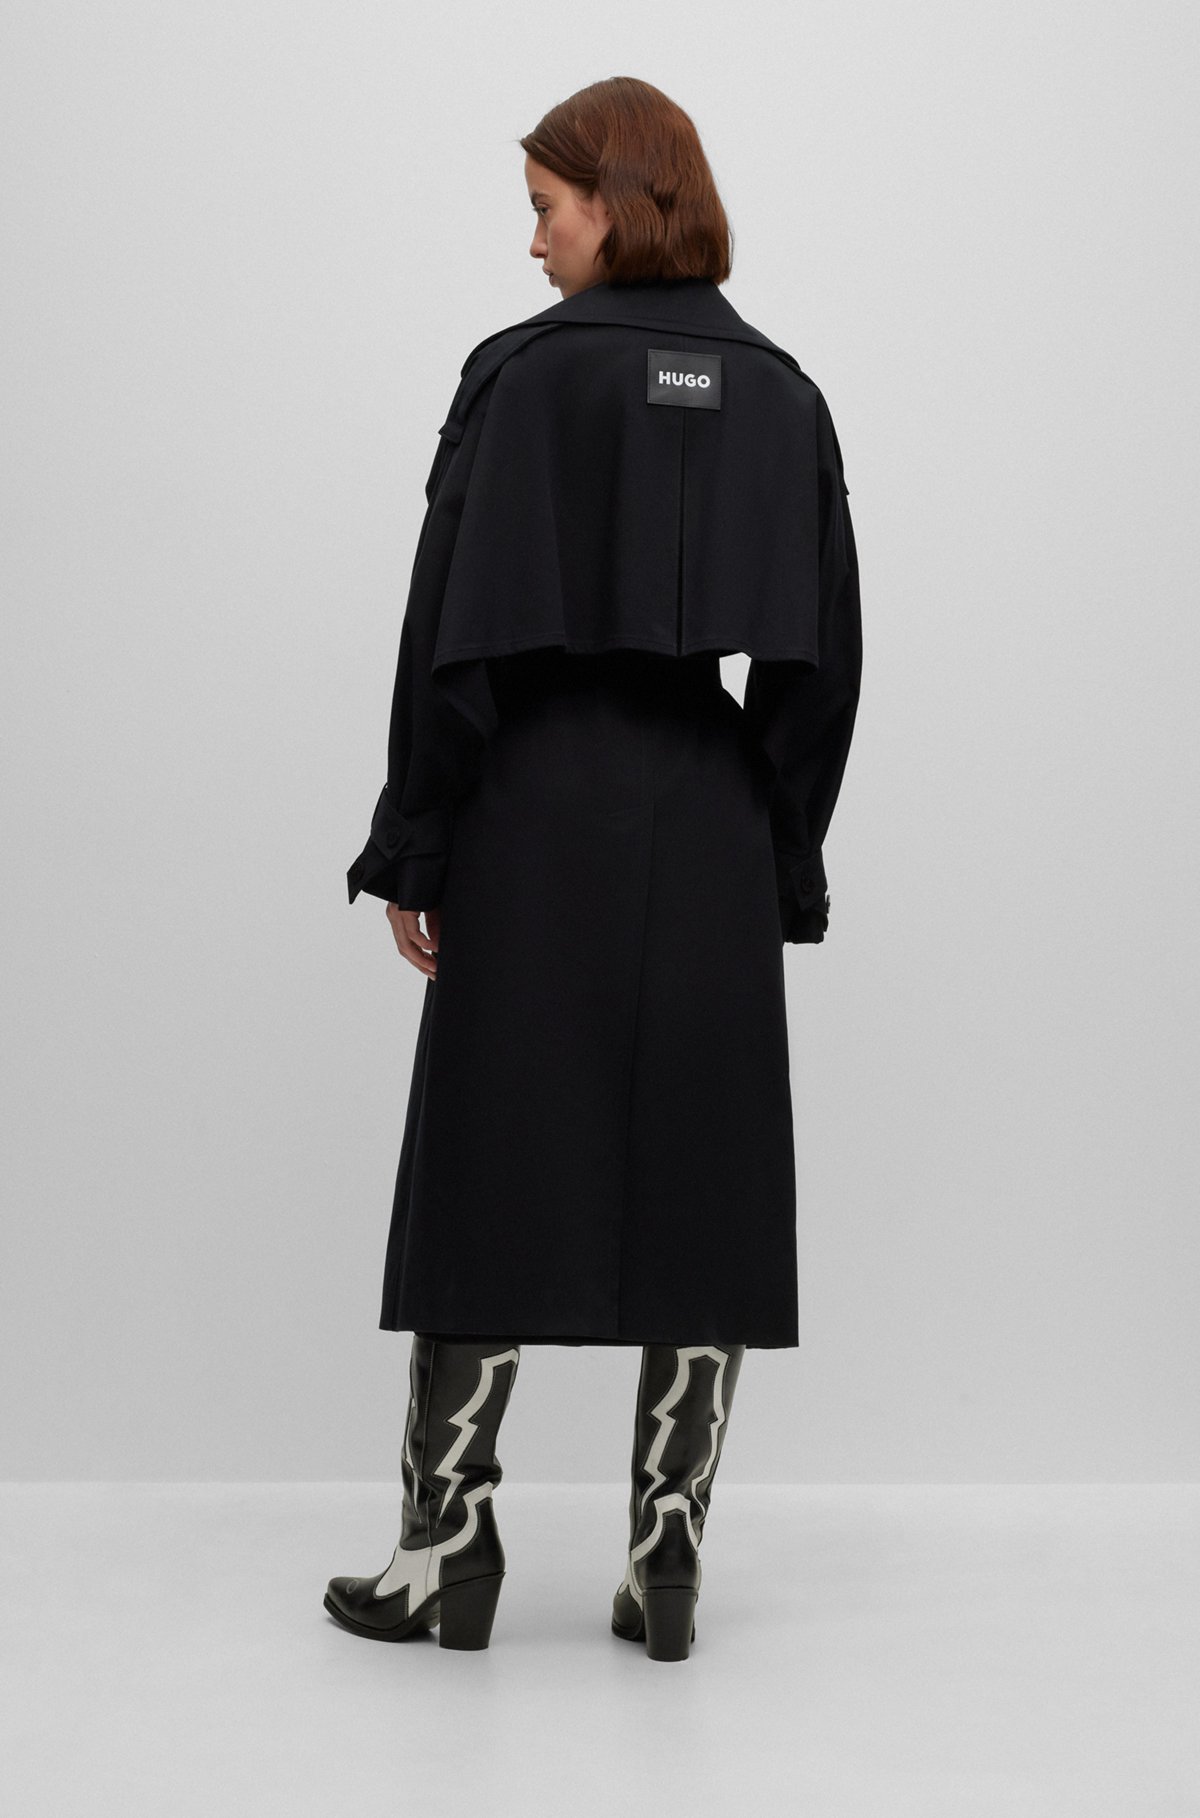 Double-breasted trench coat in stretch cotton, Black